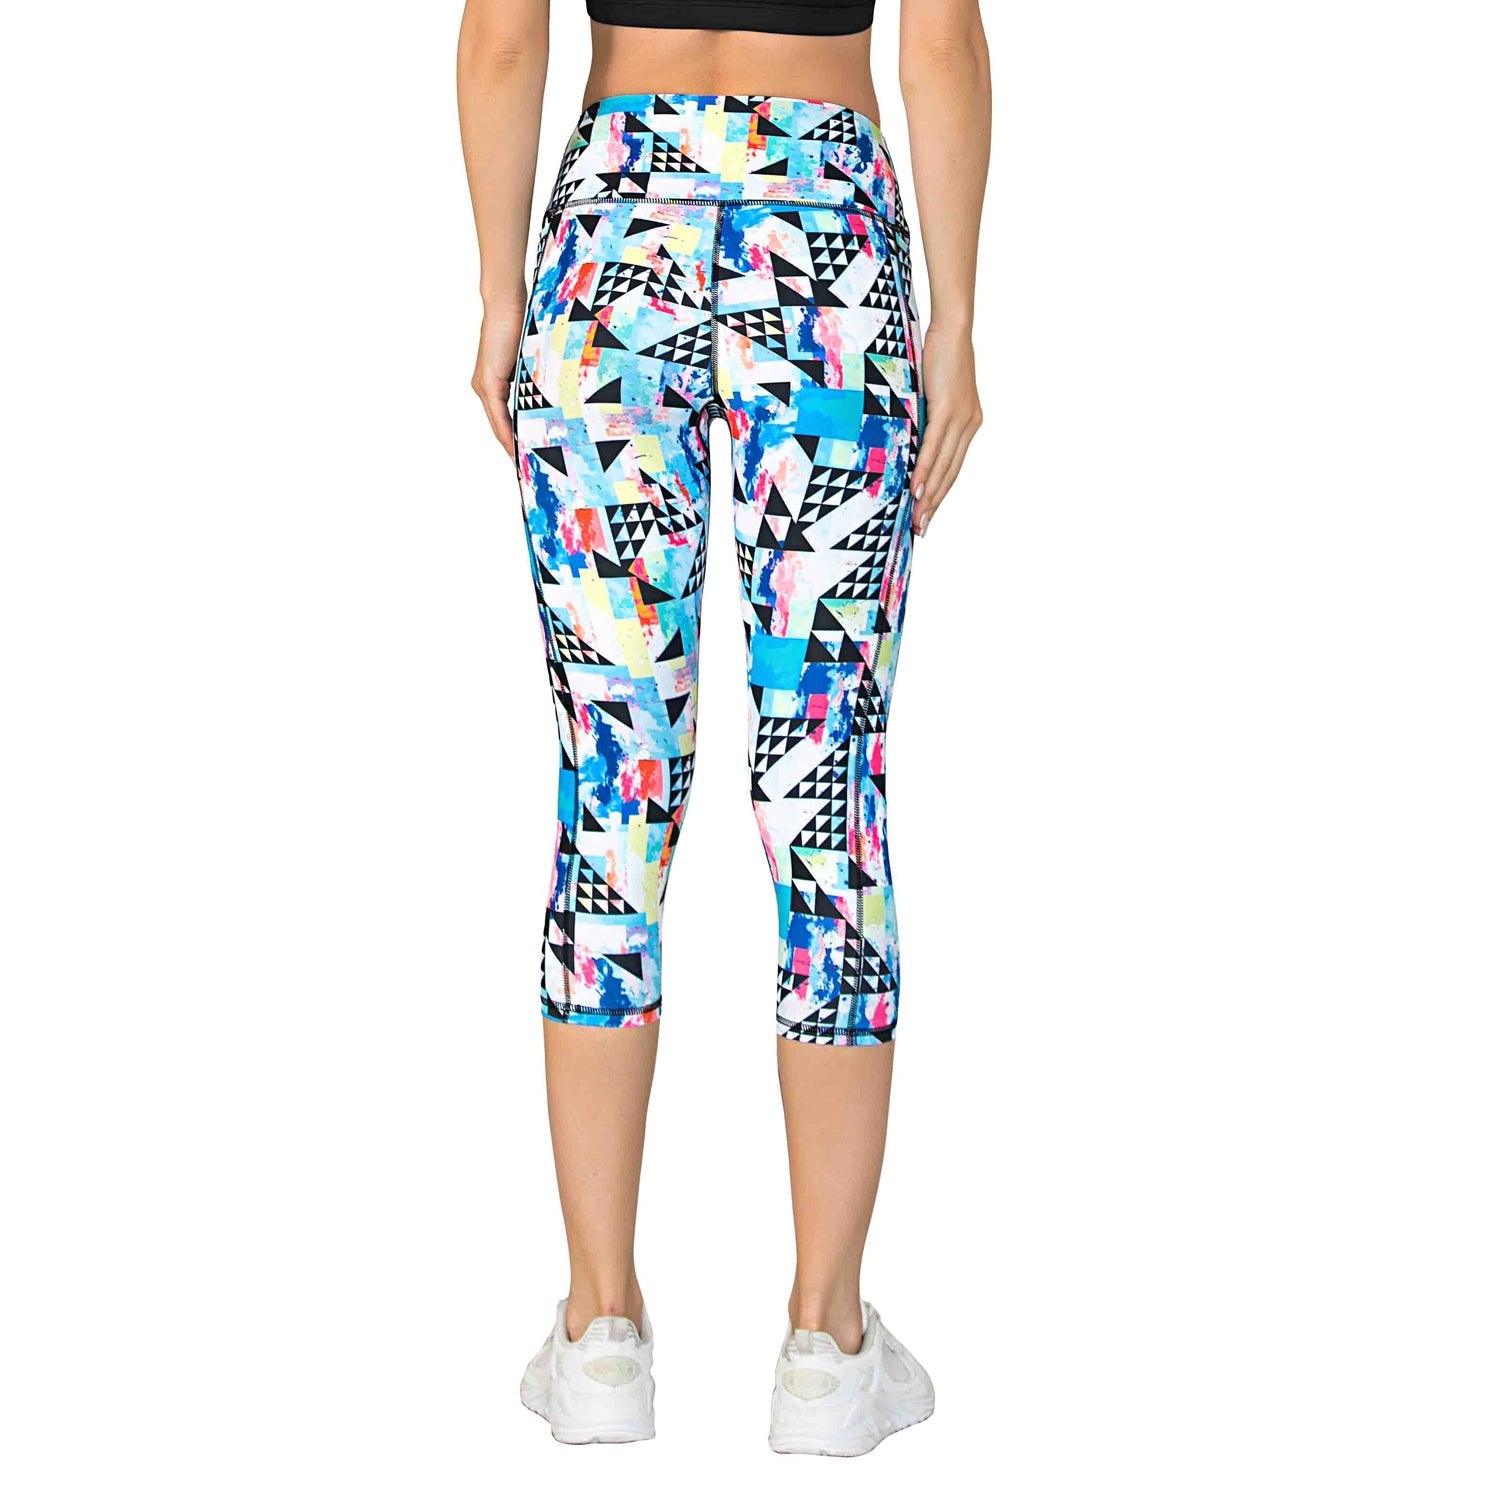 Yoga Leggings for with Pocket Pants